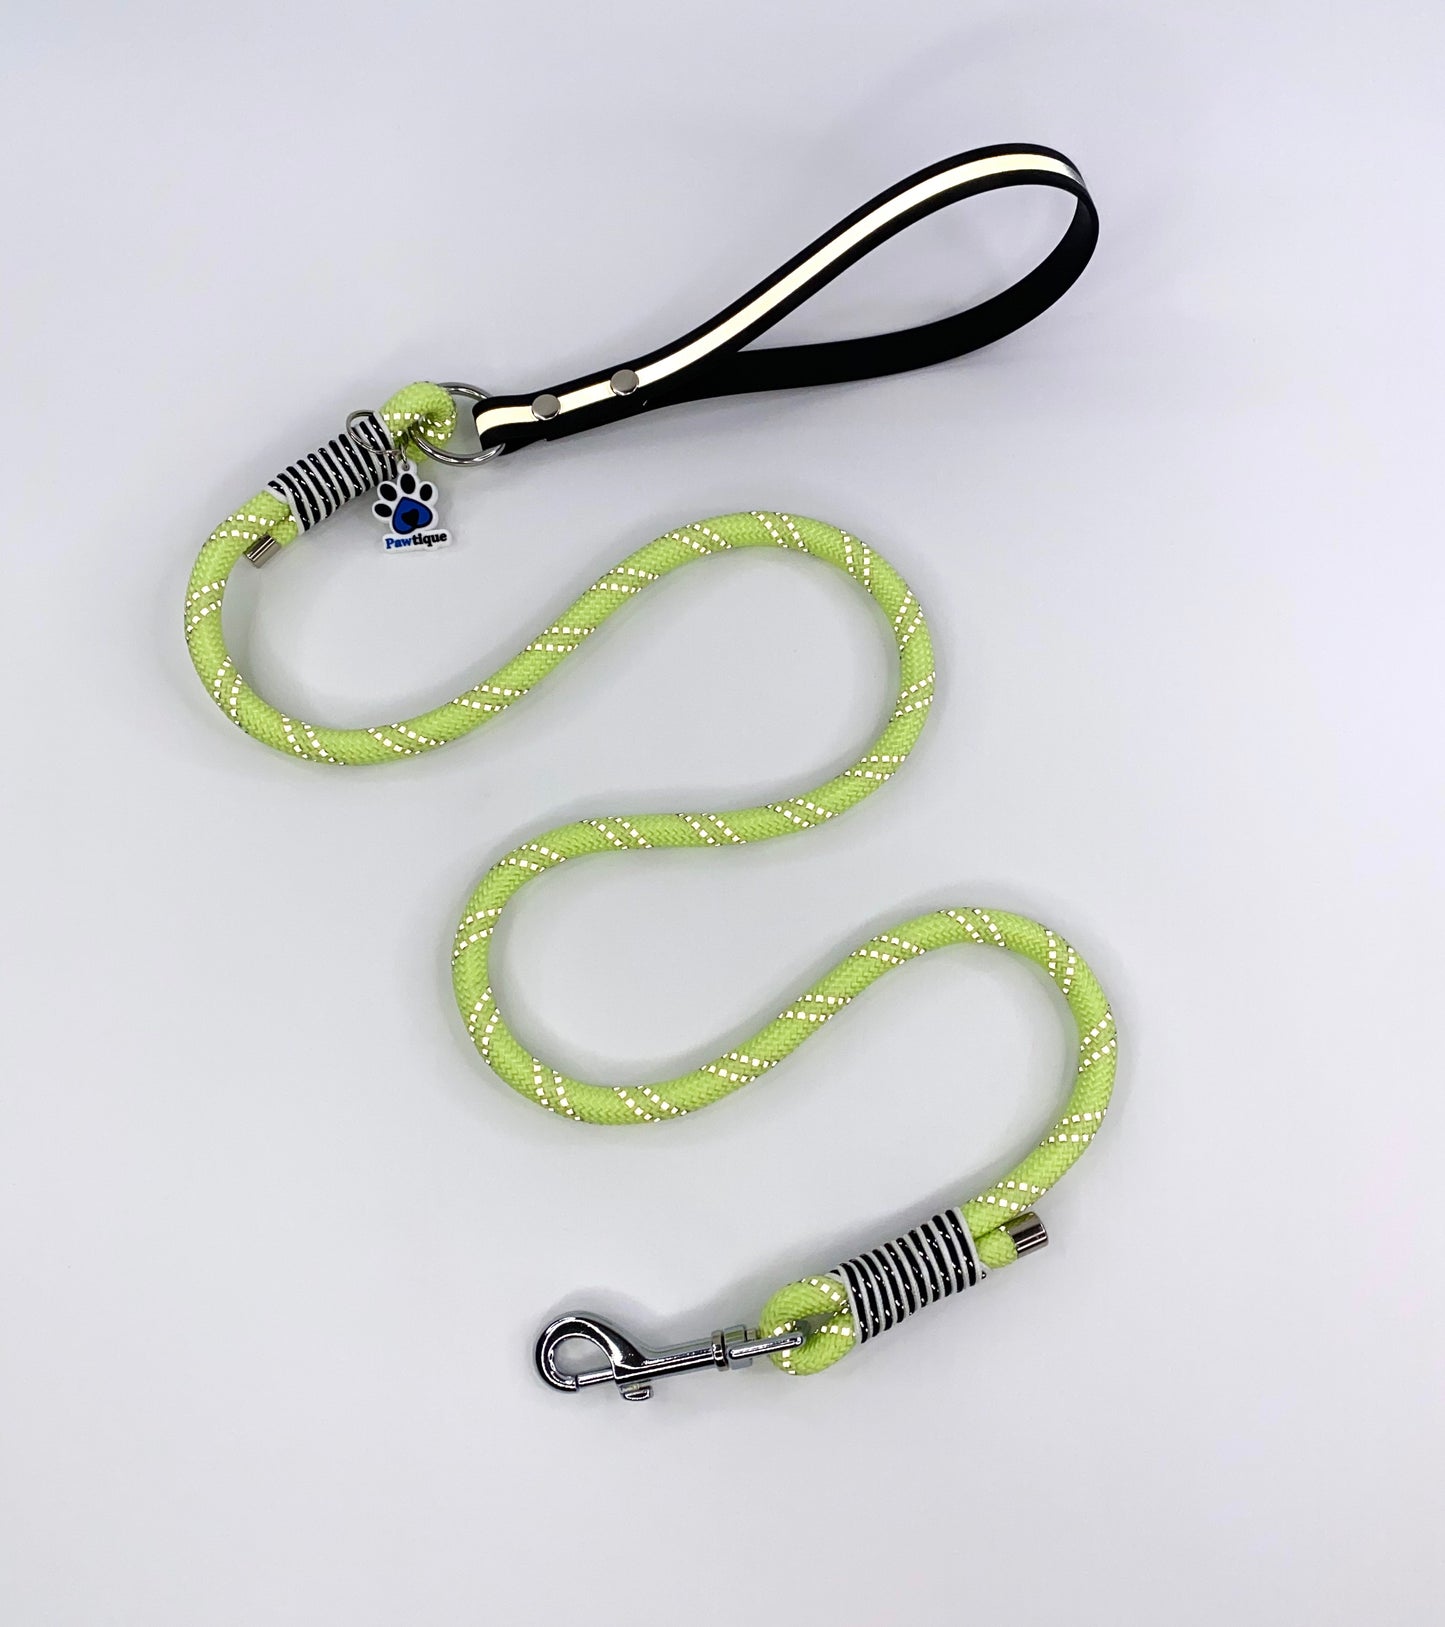 Glow in the dark/Reflective Rope Lead